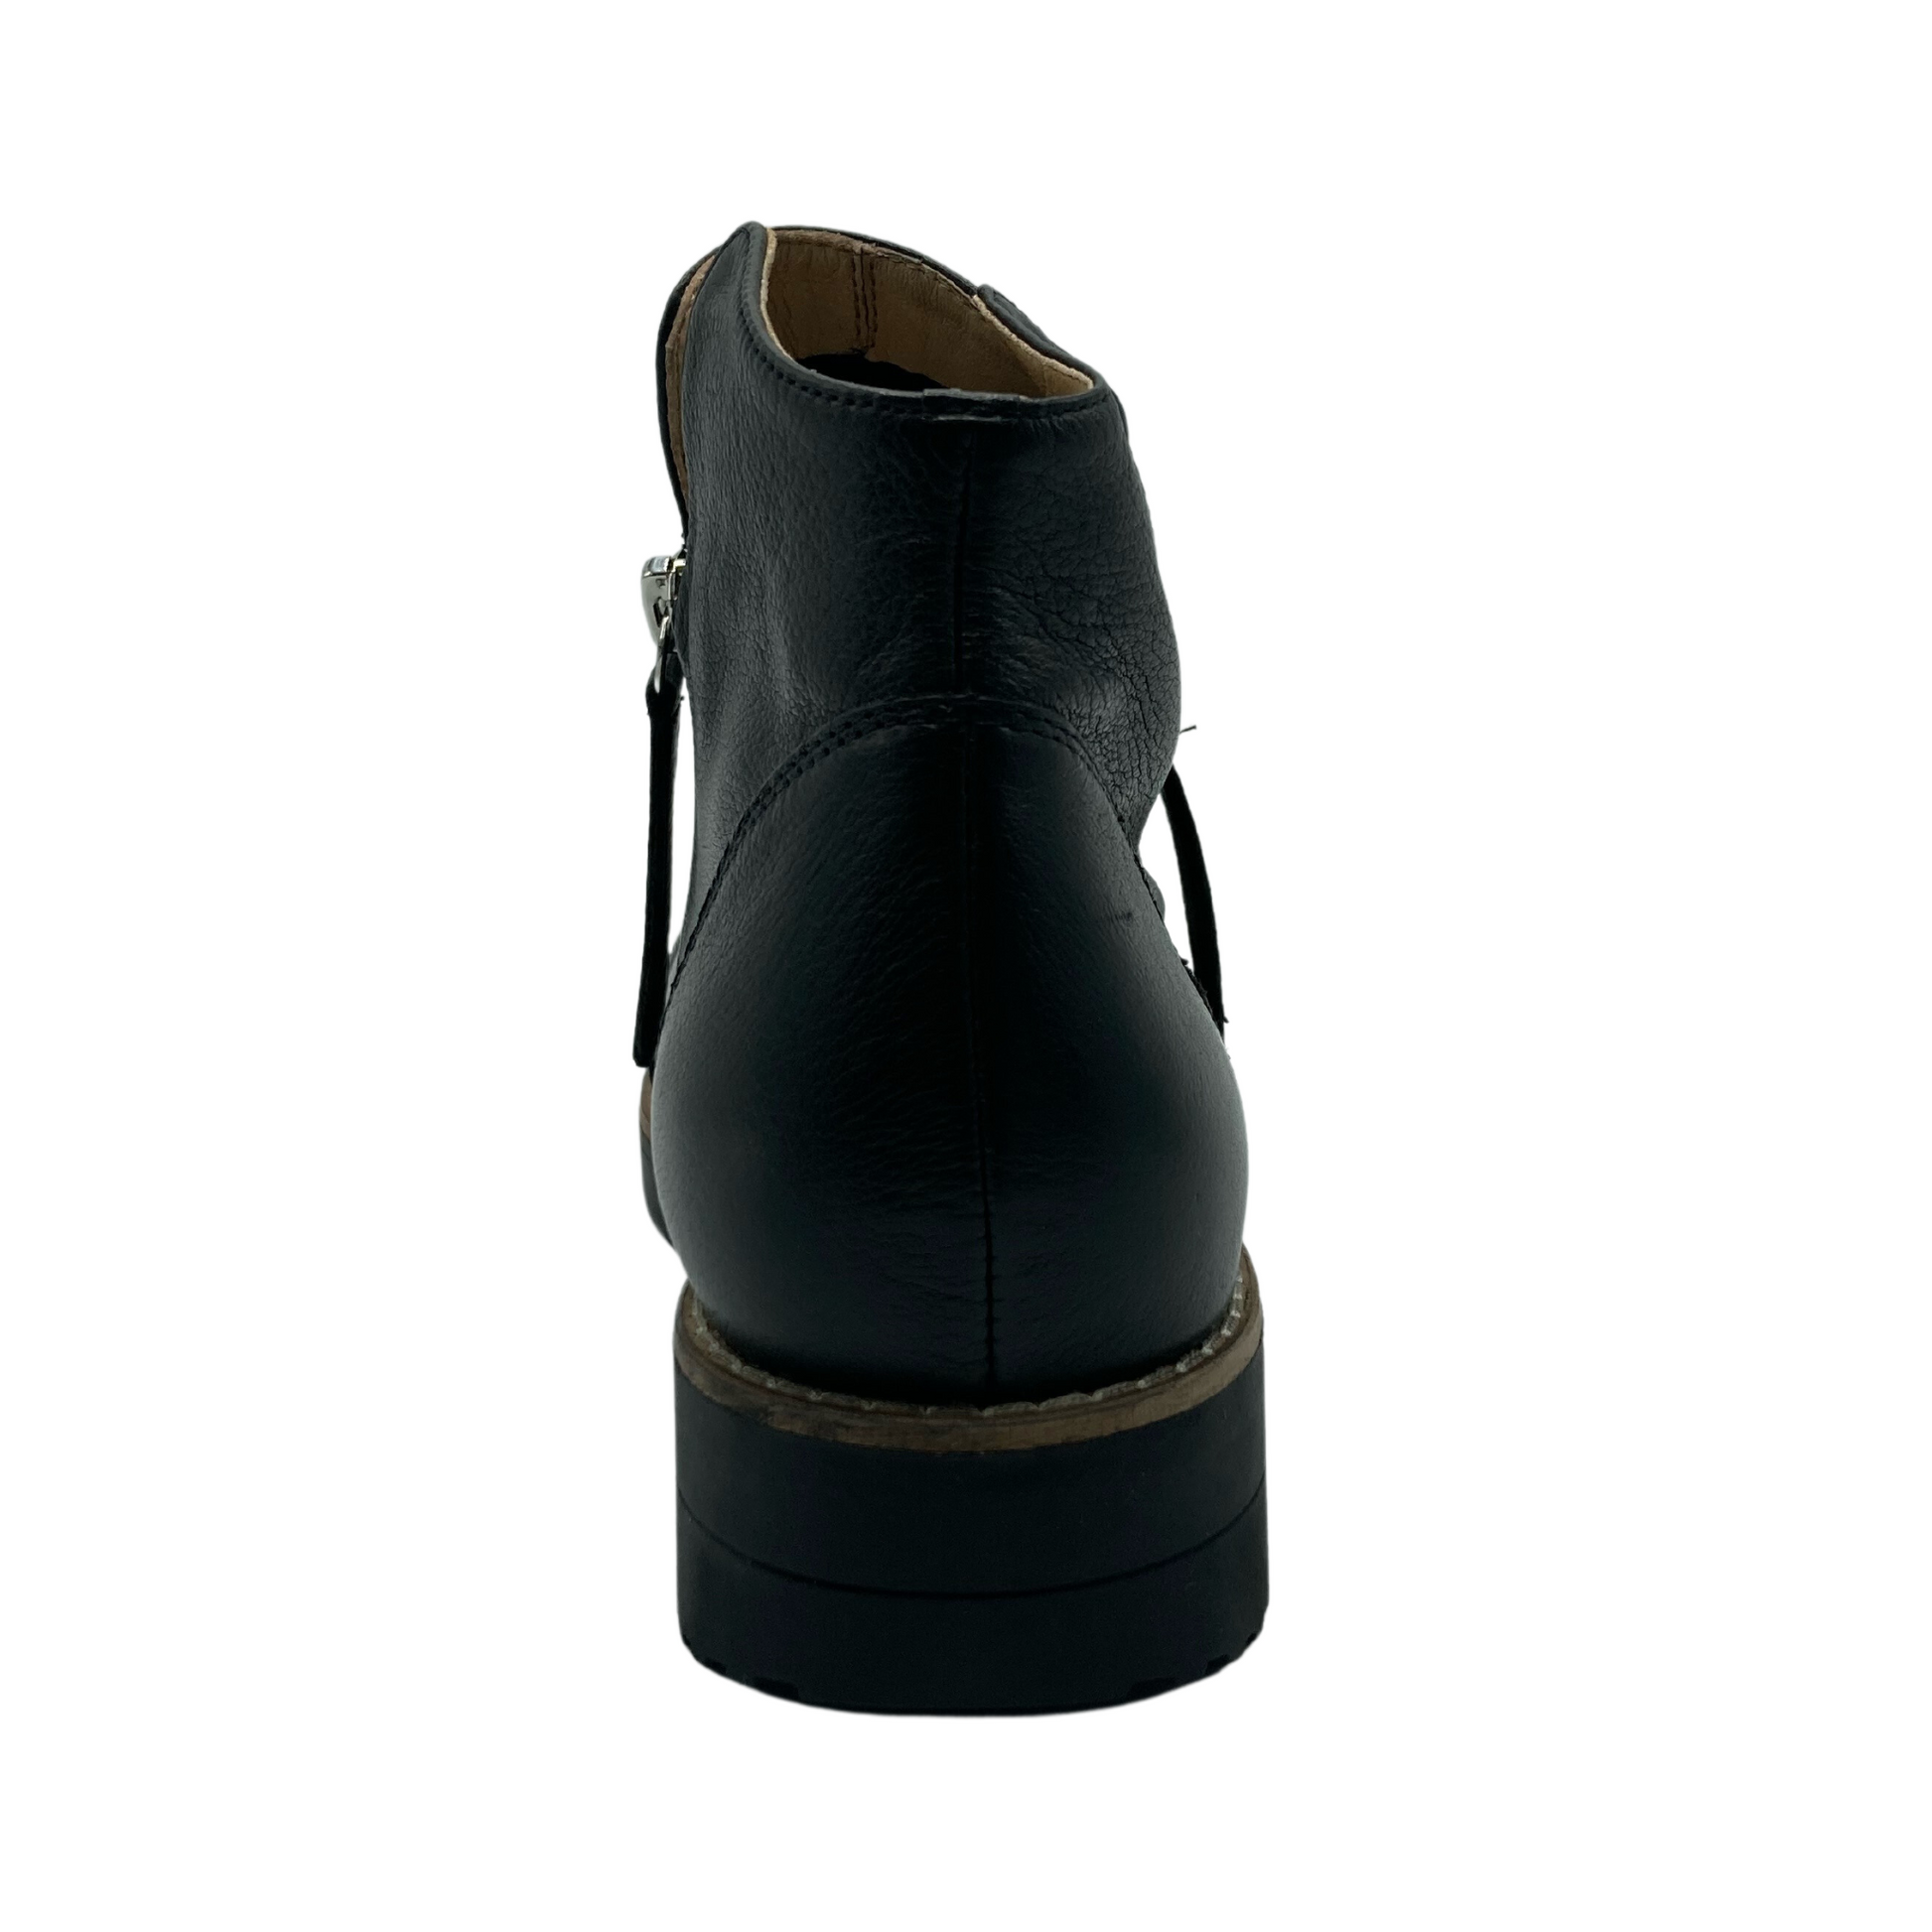 Hind view of a short black leather boot with two zippers and black rubber sole